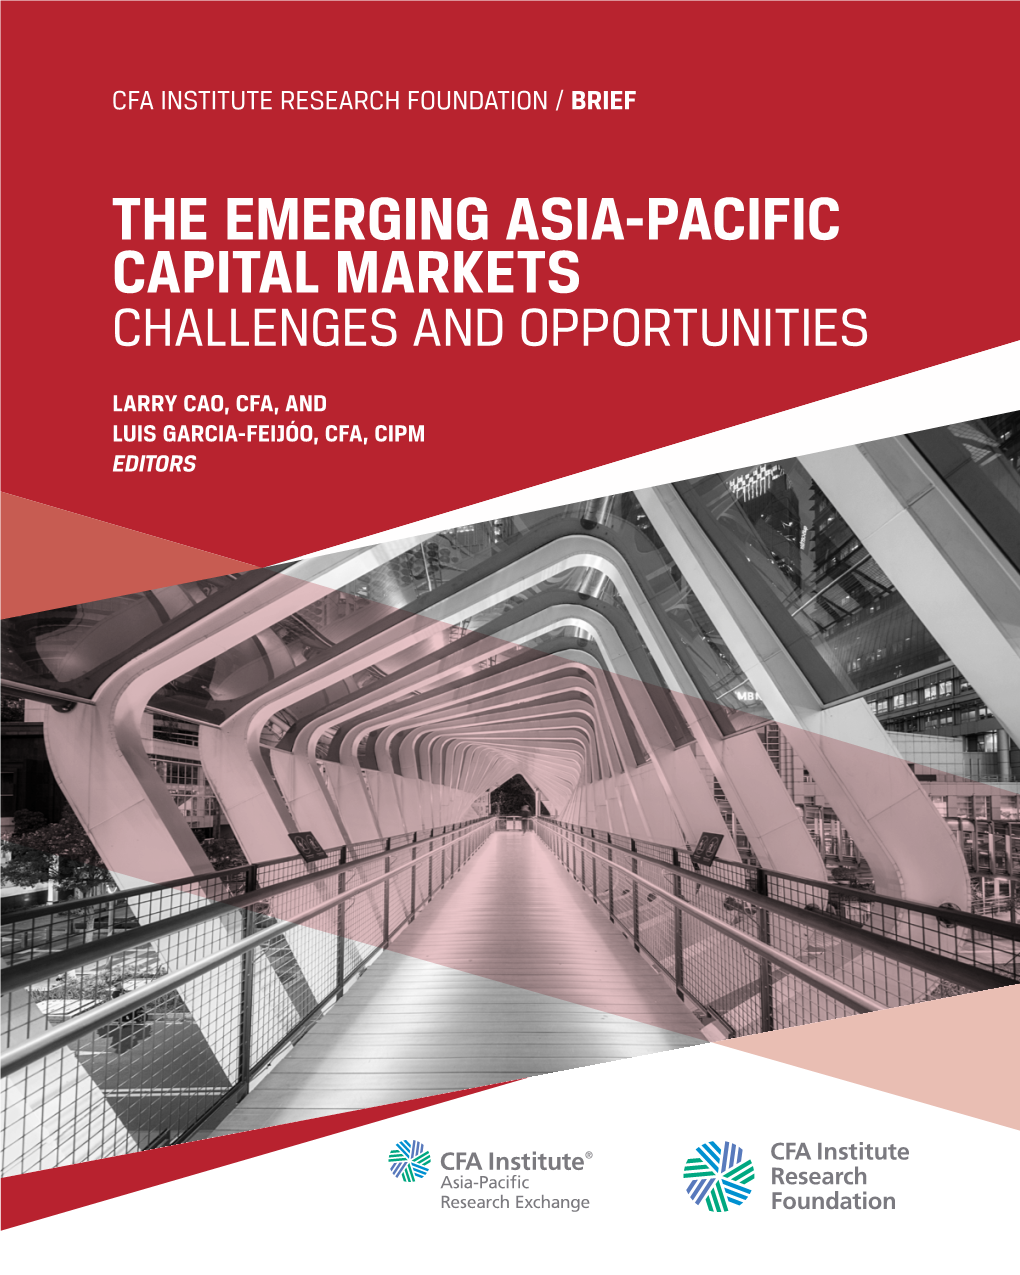 The Emerging Asia-Pacific Capital Markets Challenges and Opportunities